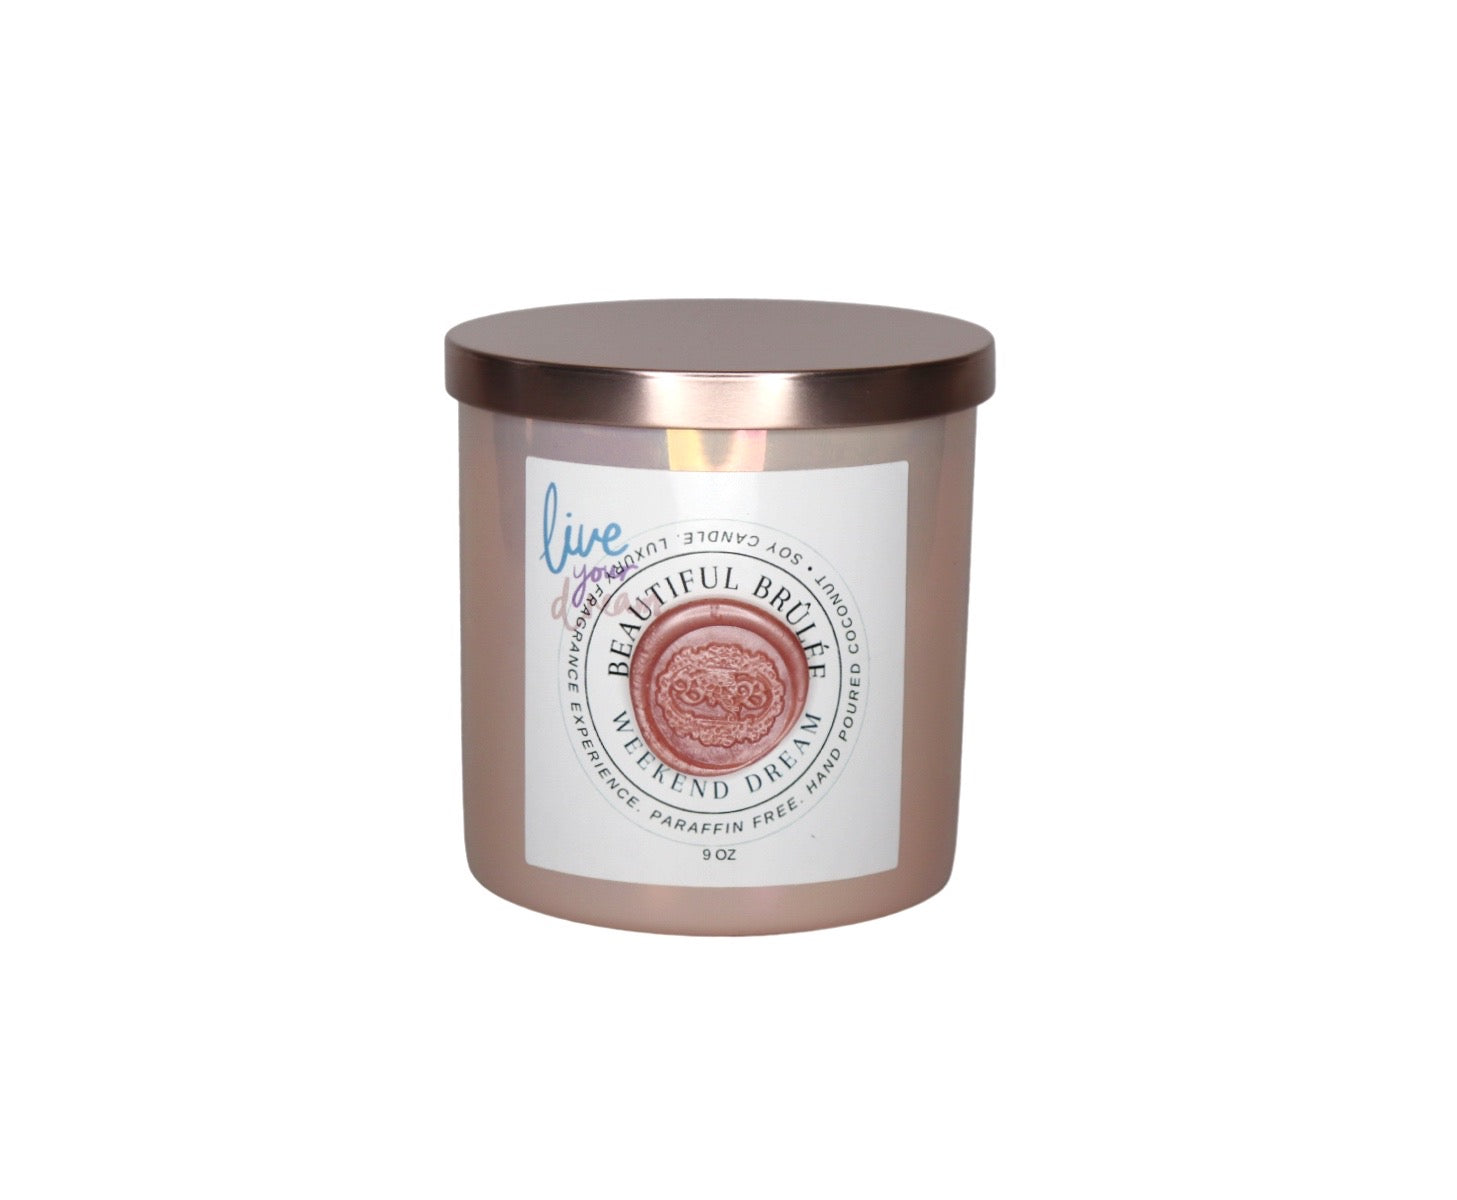 "WEEKEND DREAM" LUXURY SCENTED CANDLE